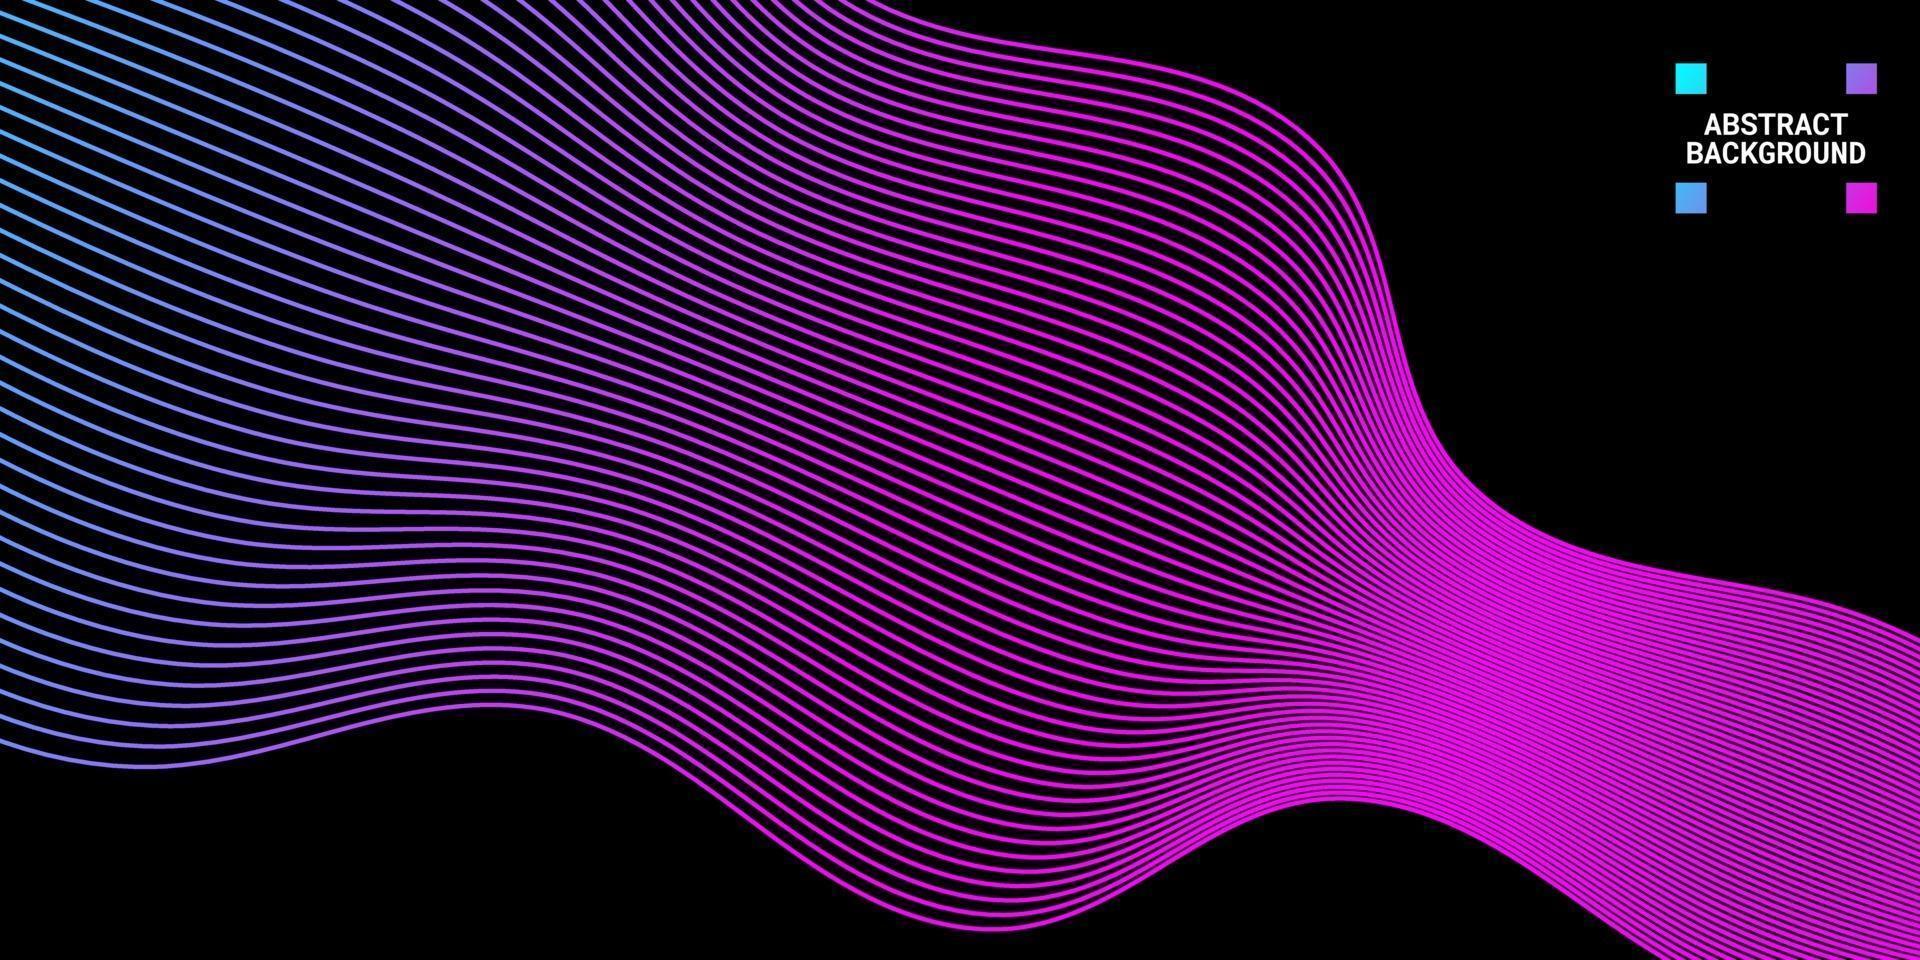 Modern abstract background with wavy lines in blue and purple gradations vector